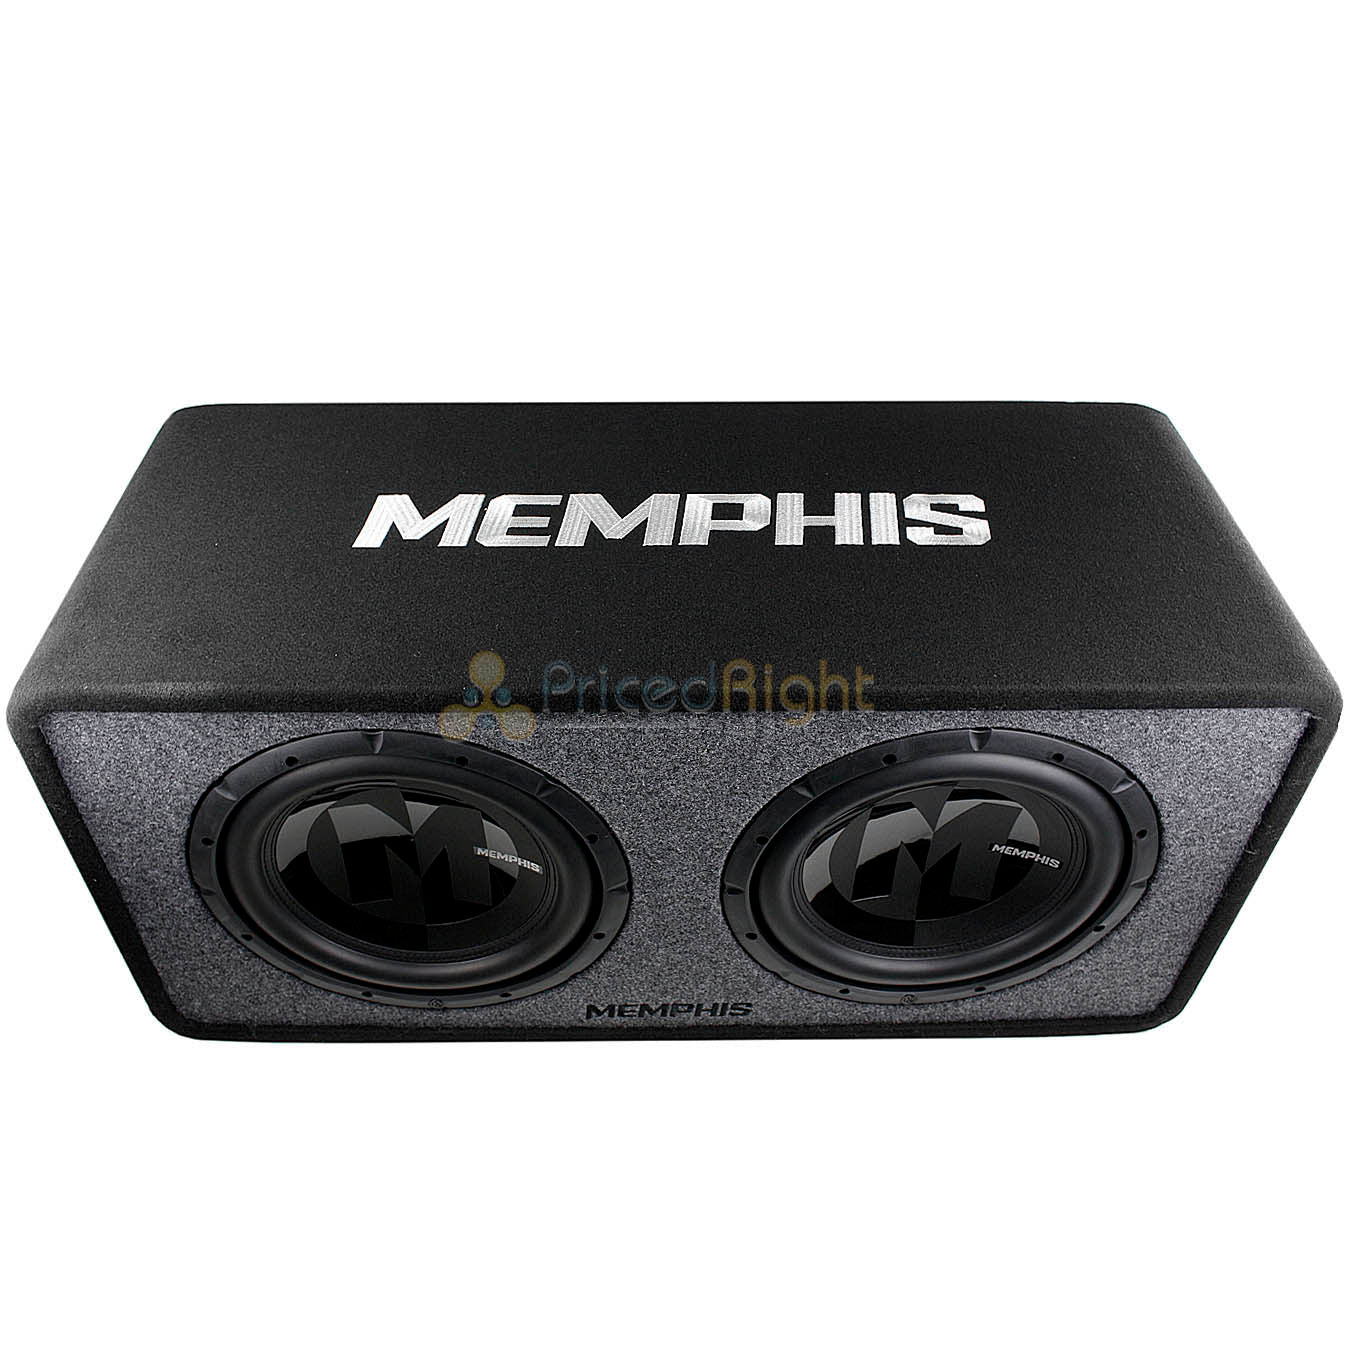 Memphis Dual 12" Loaded Enclosure 1 Ohm 1200 Watts Max Power Reference PRXE12D1